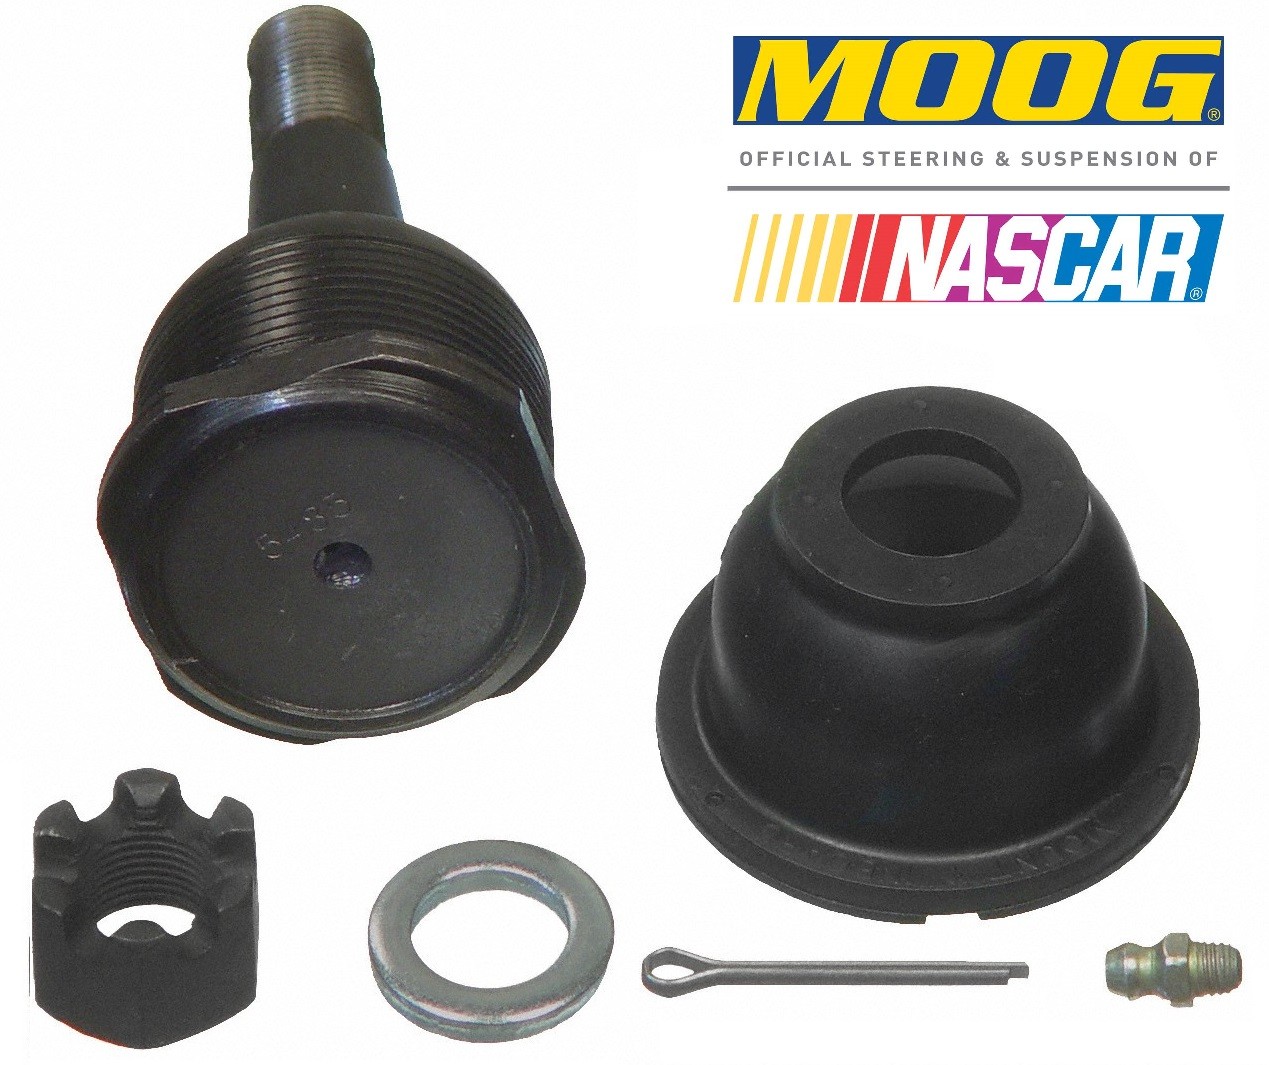 Lower Ball Joint : MOOG : Threaded Fit : Suit 1973 B Body